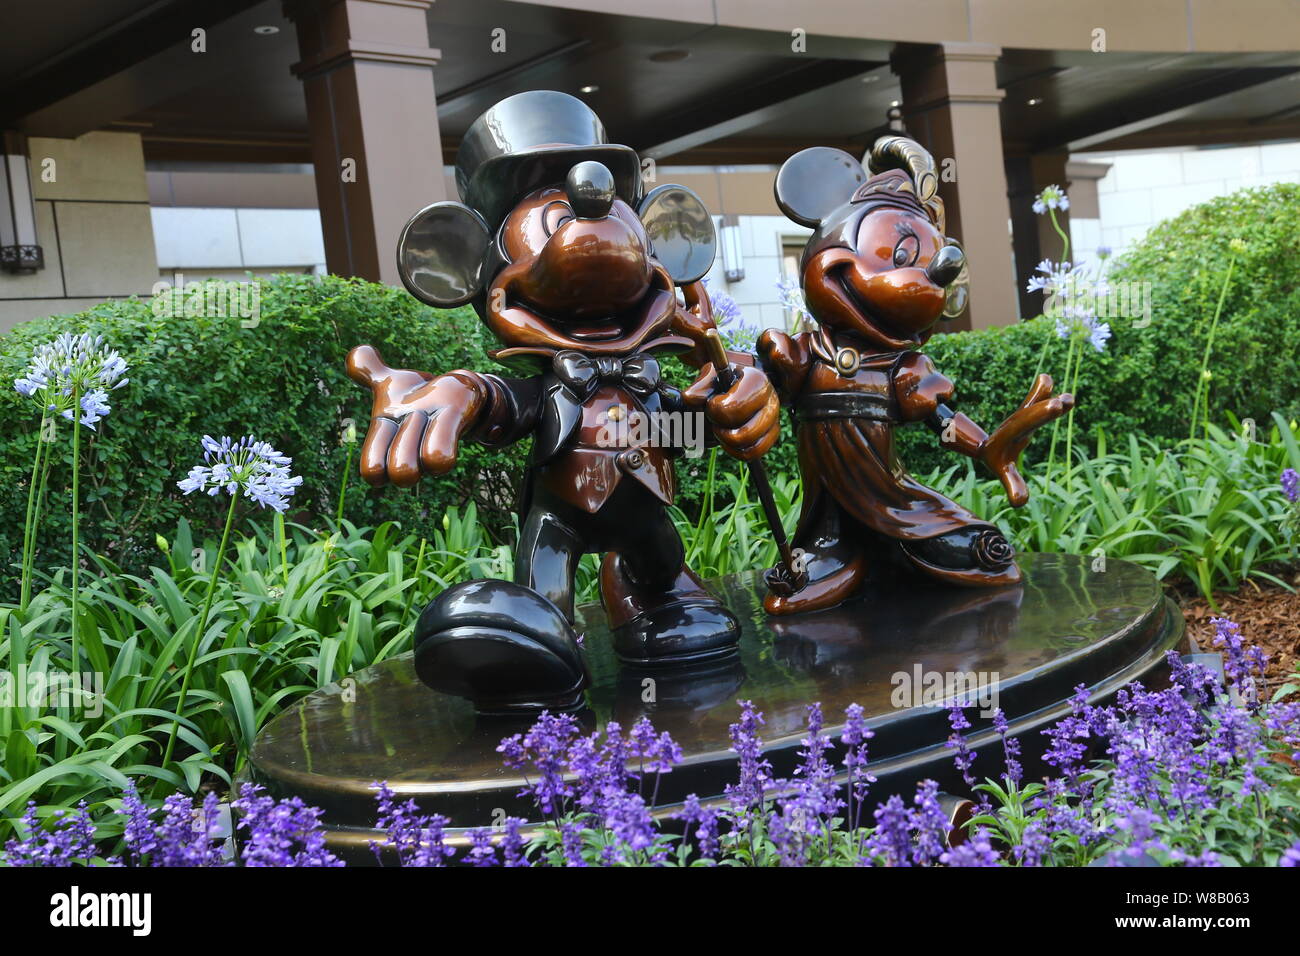 Statues Of Mickey Mouse And Minnie Mouse Are Displayed Outside The